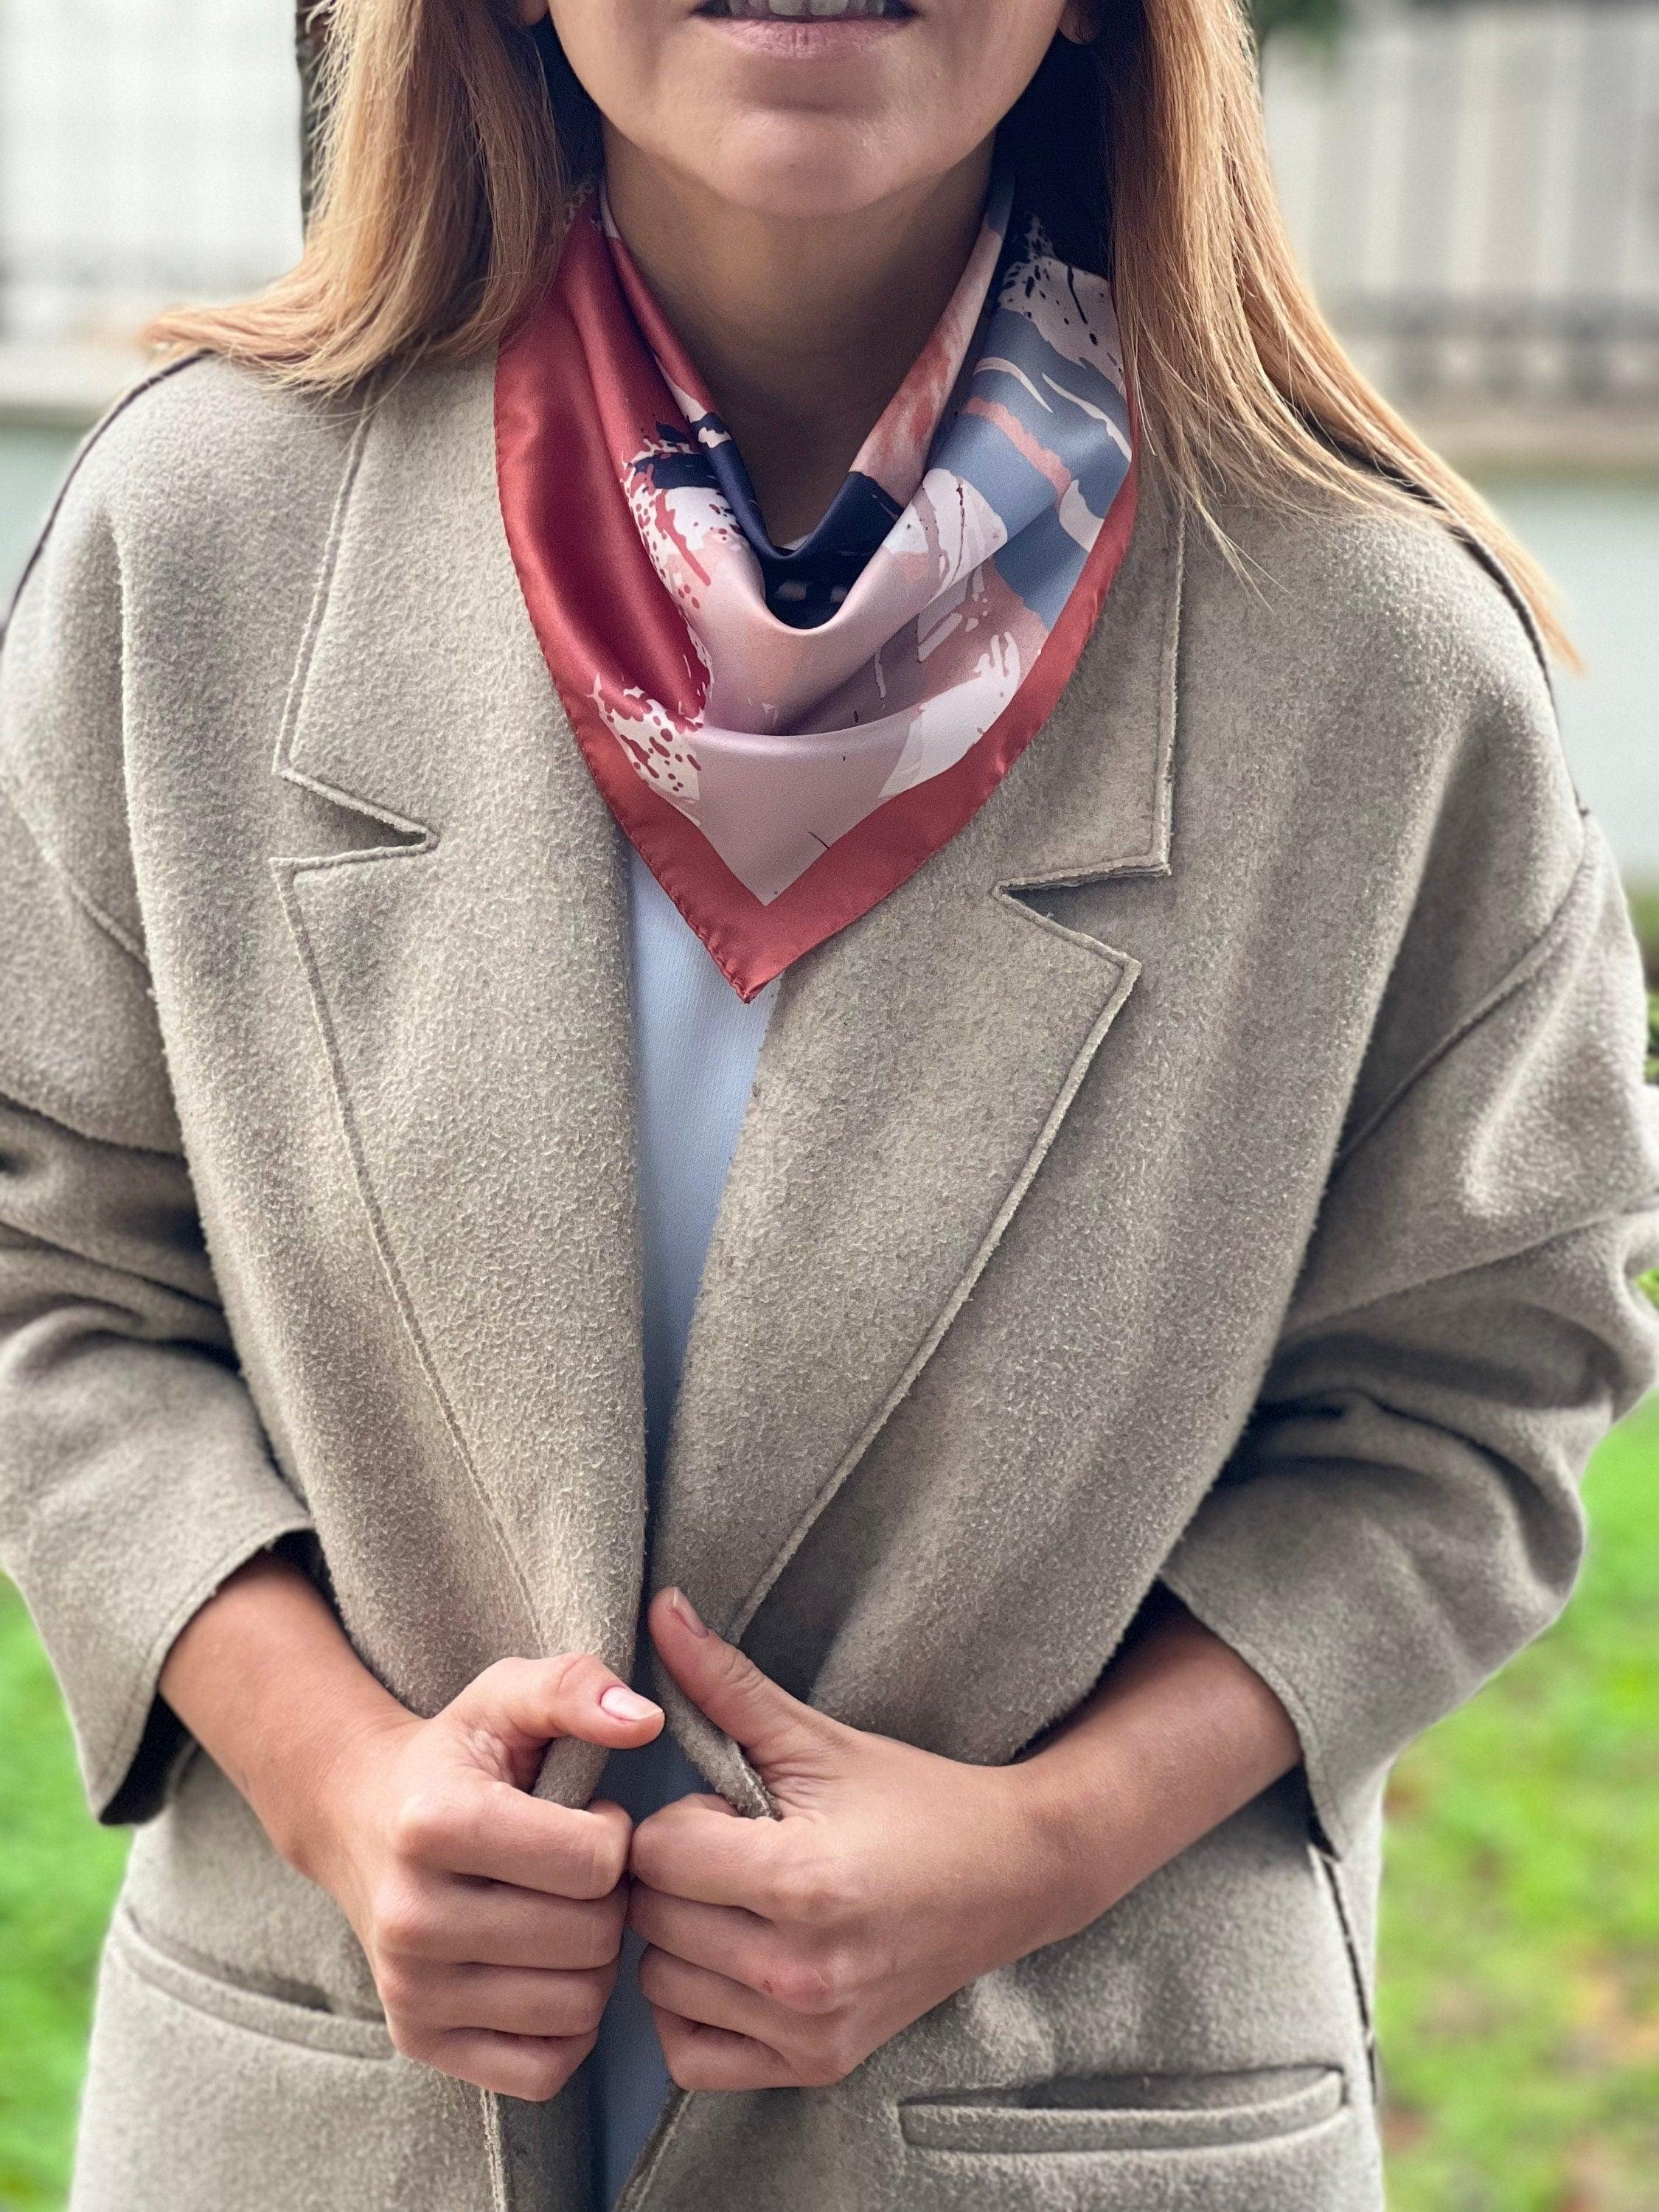 High-Quality 100% Satin Spring Scarf in Dark Blue Cream Art Pattern - Gift for Women, Neck Scarf, Hair Scarf, Red White Head Scarf available at Moyoni Design